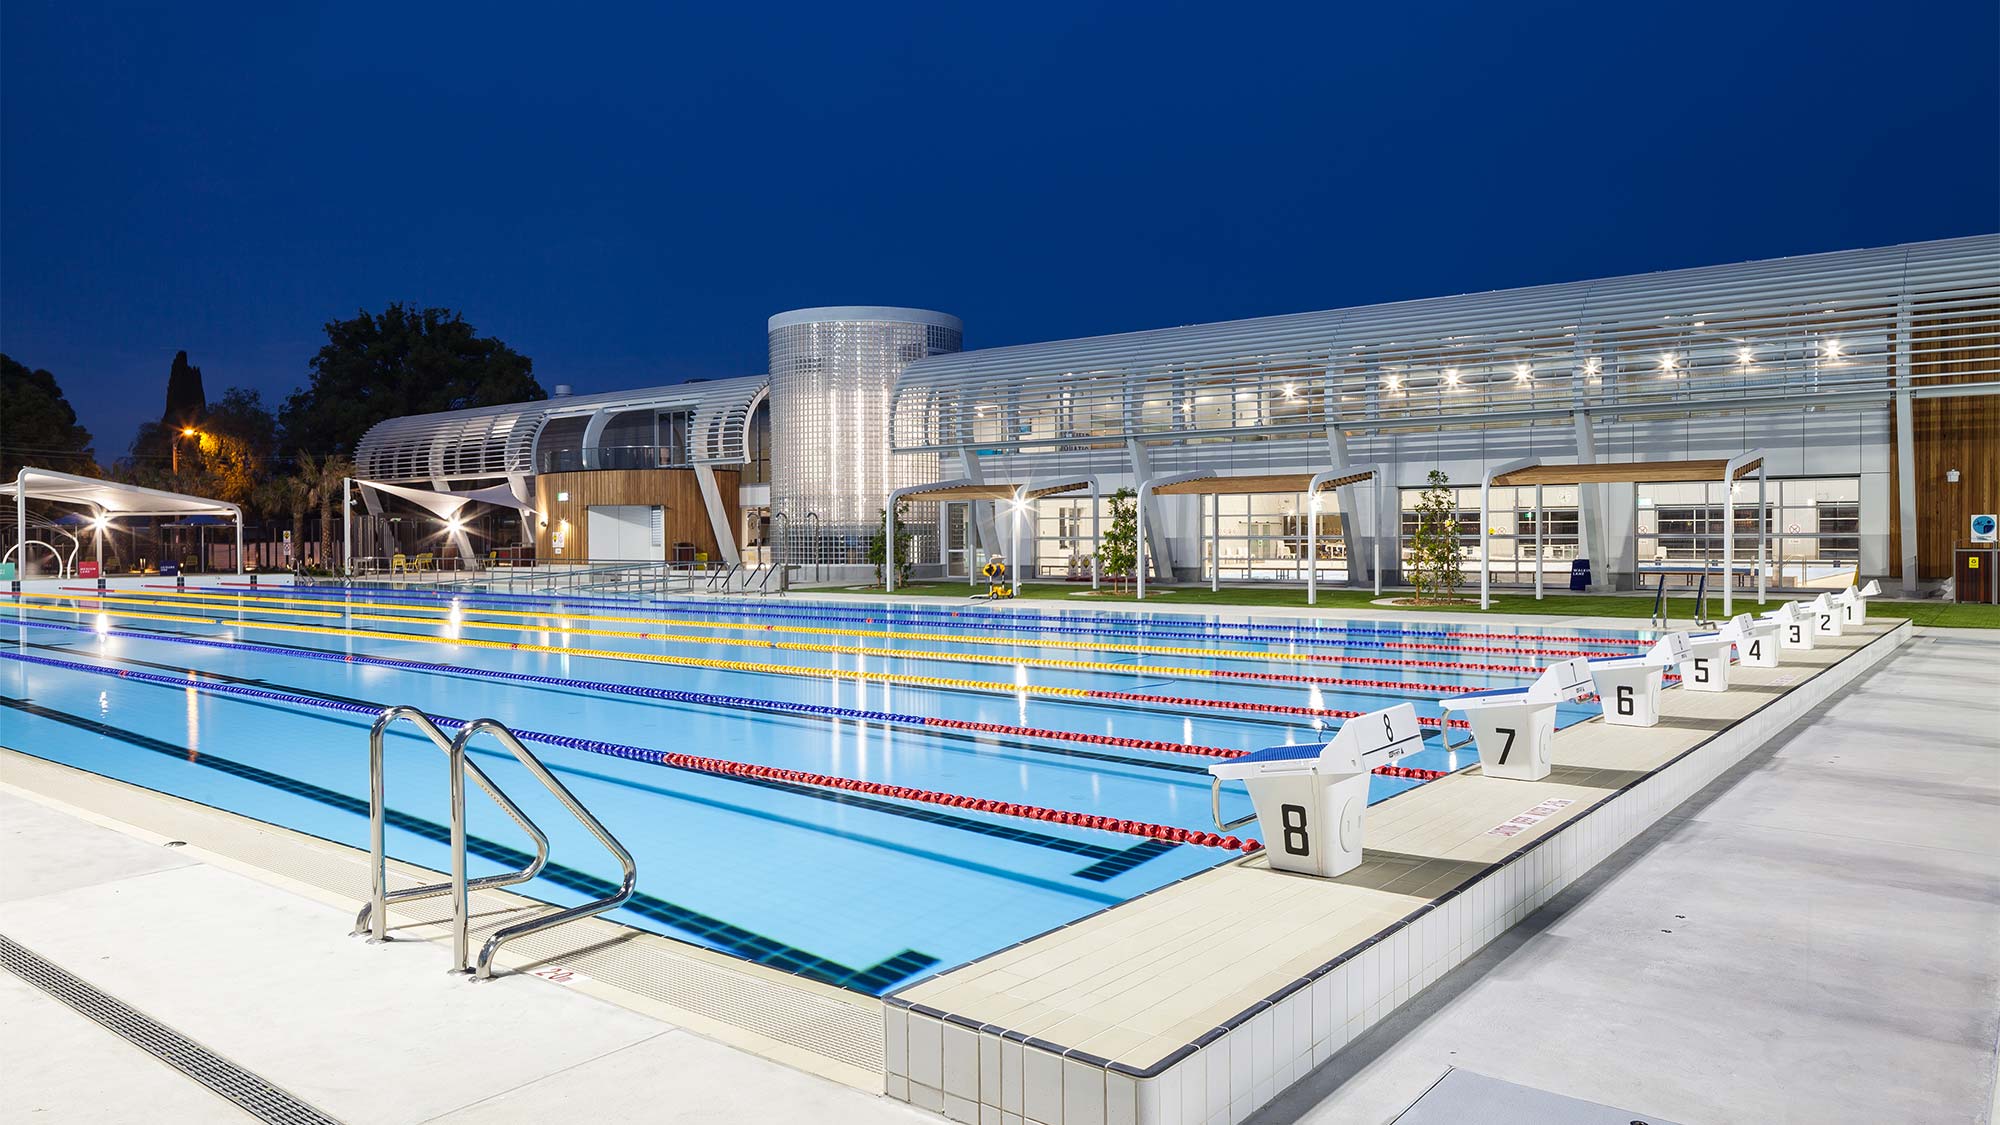 The new Ashfield Aquatic Centre officially opened to the public 